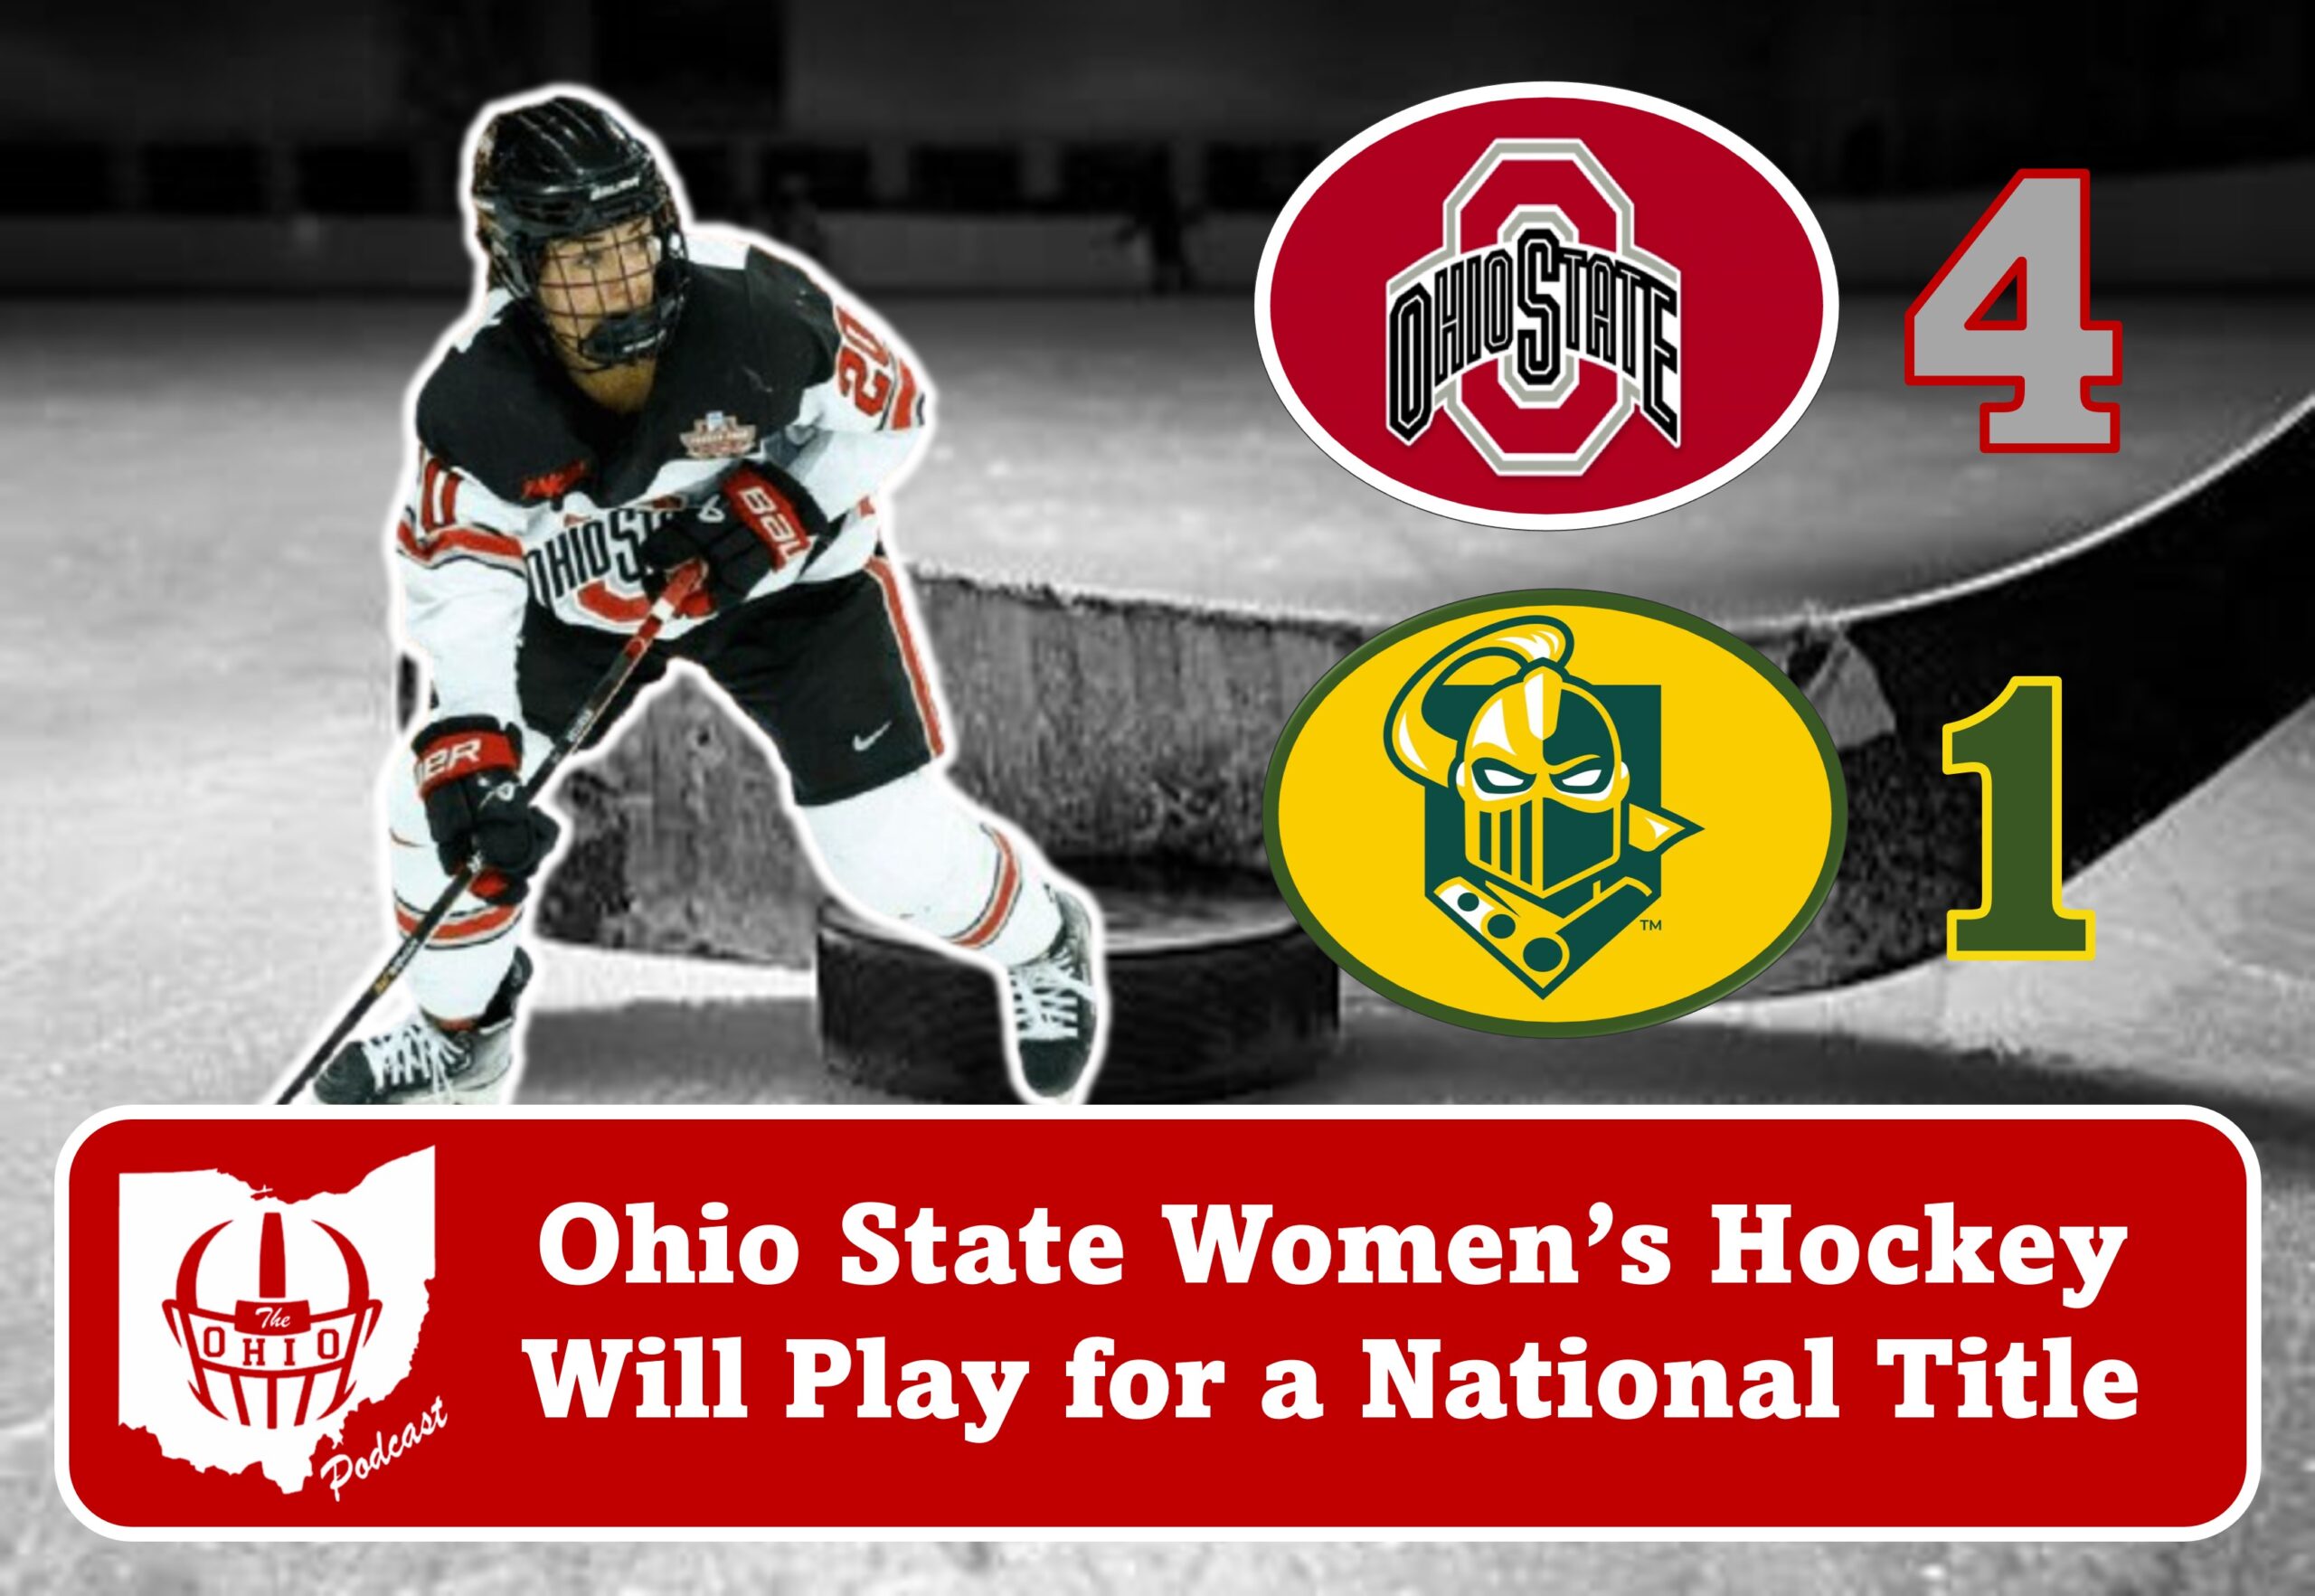 Ohio State Women's Hockey Will PLay for a National Title